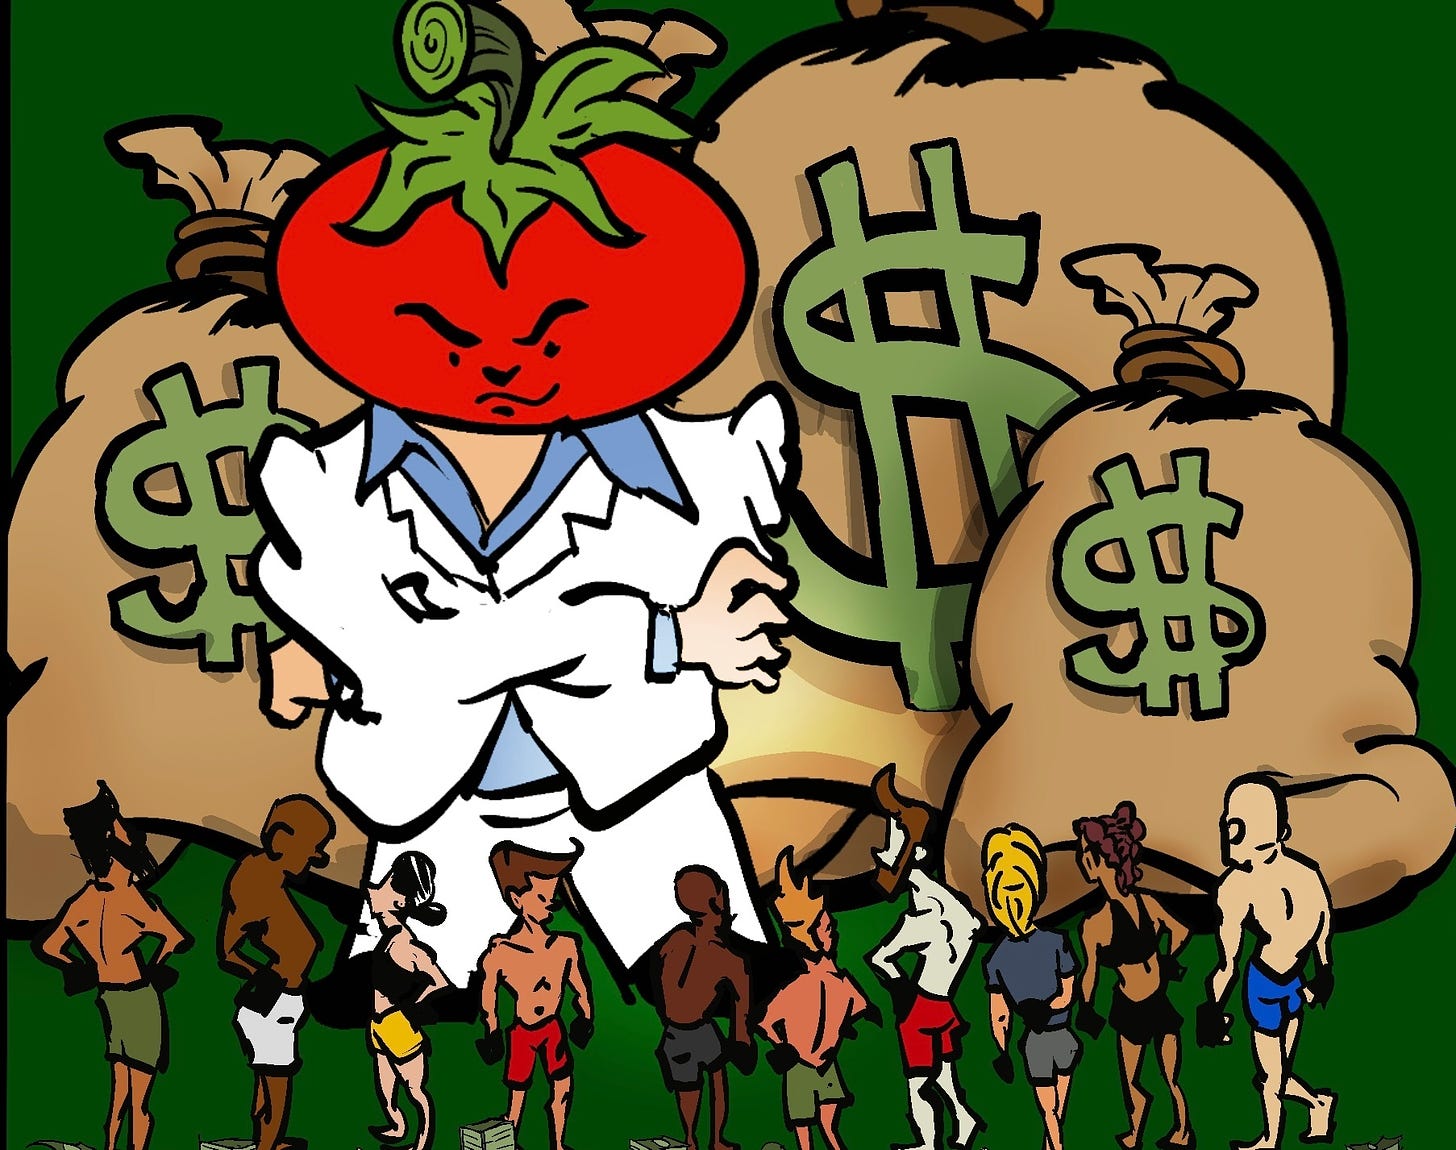 Dana White as a big red tomato surrounded by mountains of money vs several tiny fighters illustration by Chris Rini